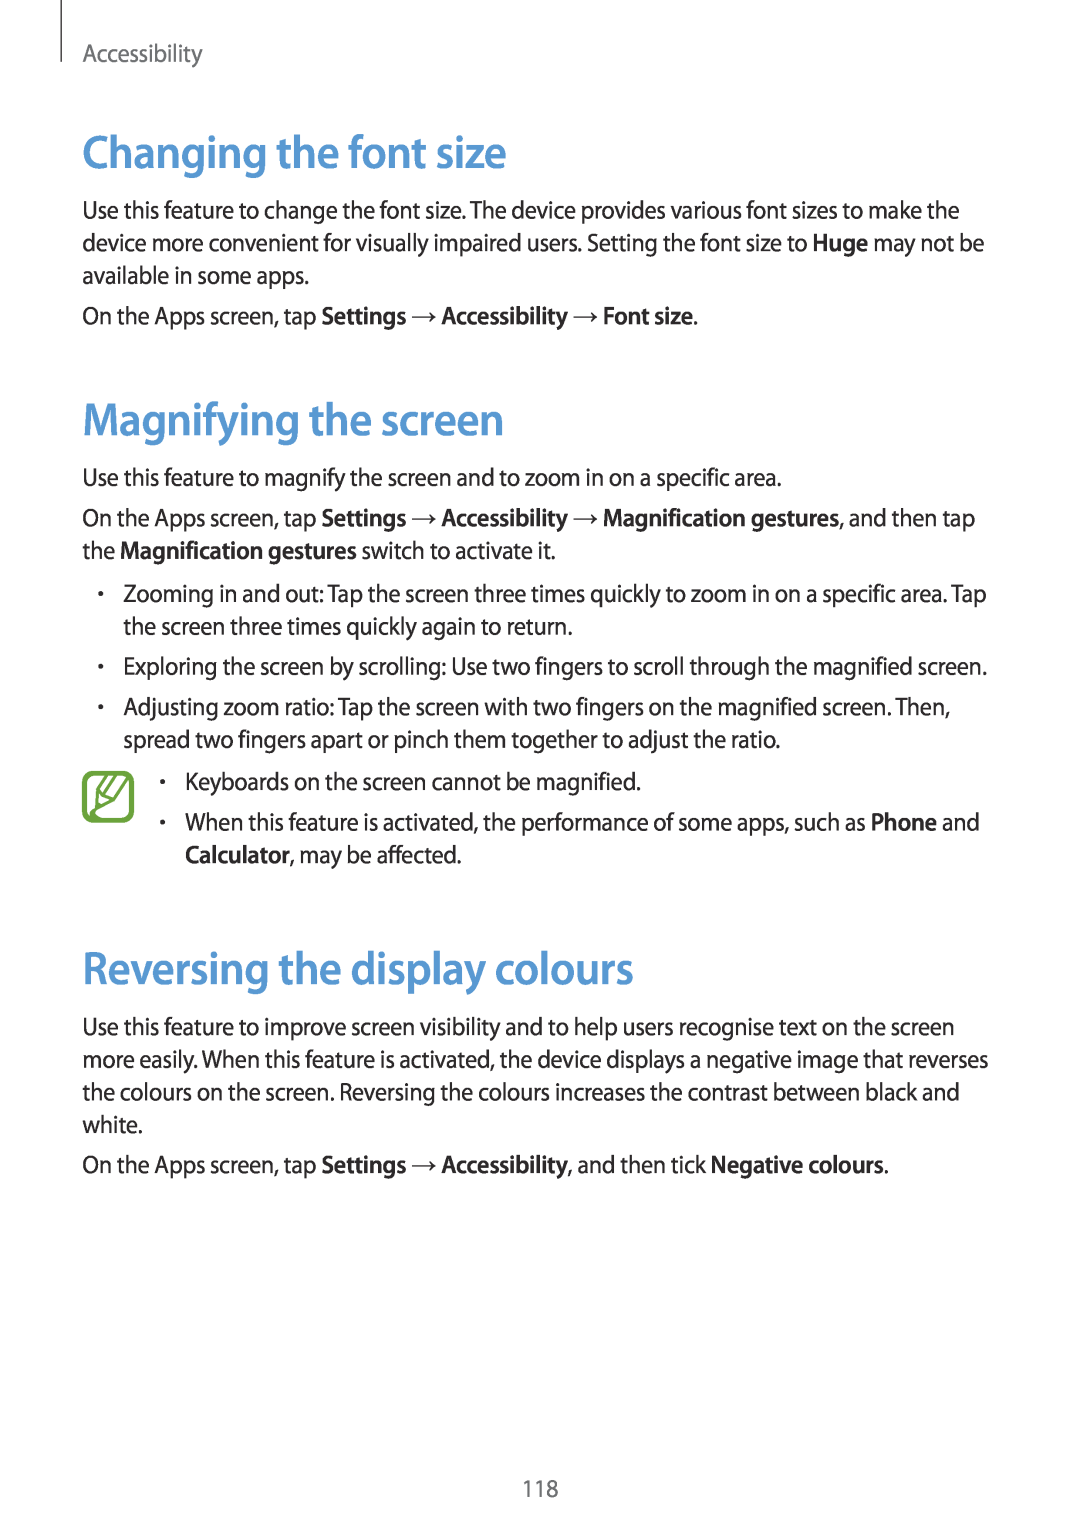 Samsung SM-G357FZAZNRJ manual Changing the font size, Magnifying the screen, Reversing the display colours, Accessibility 